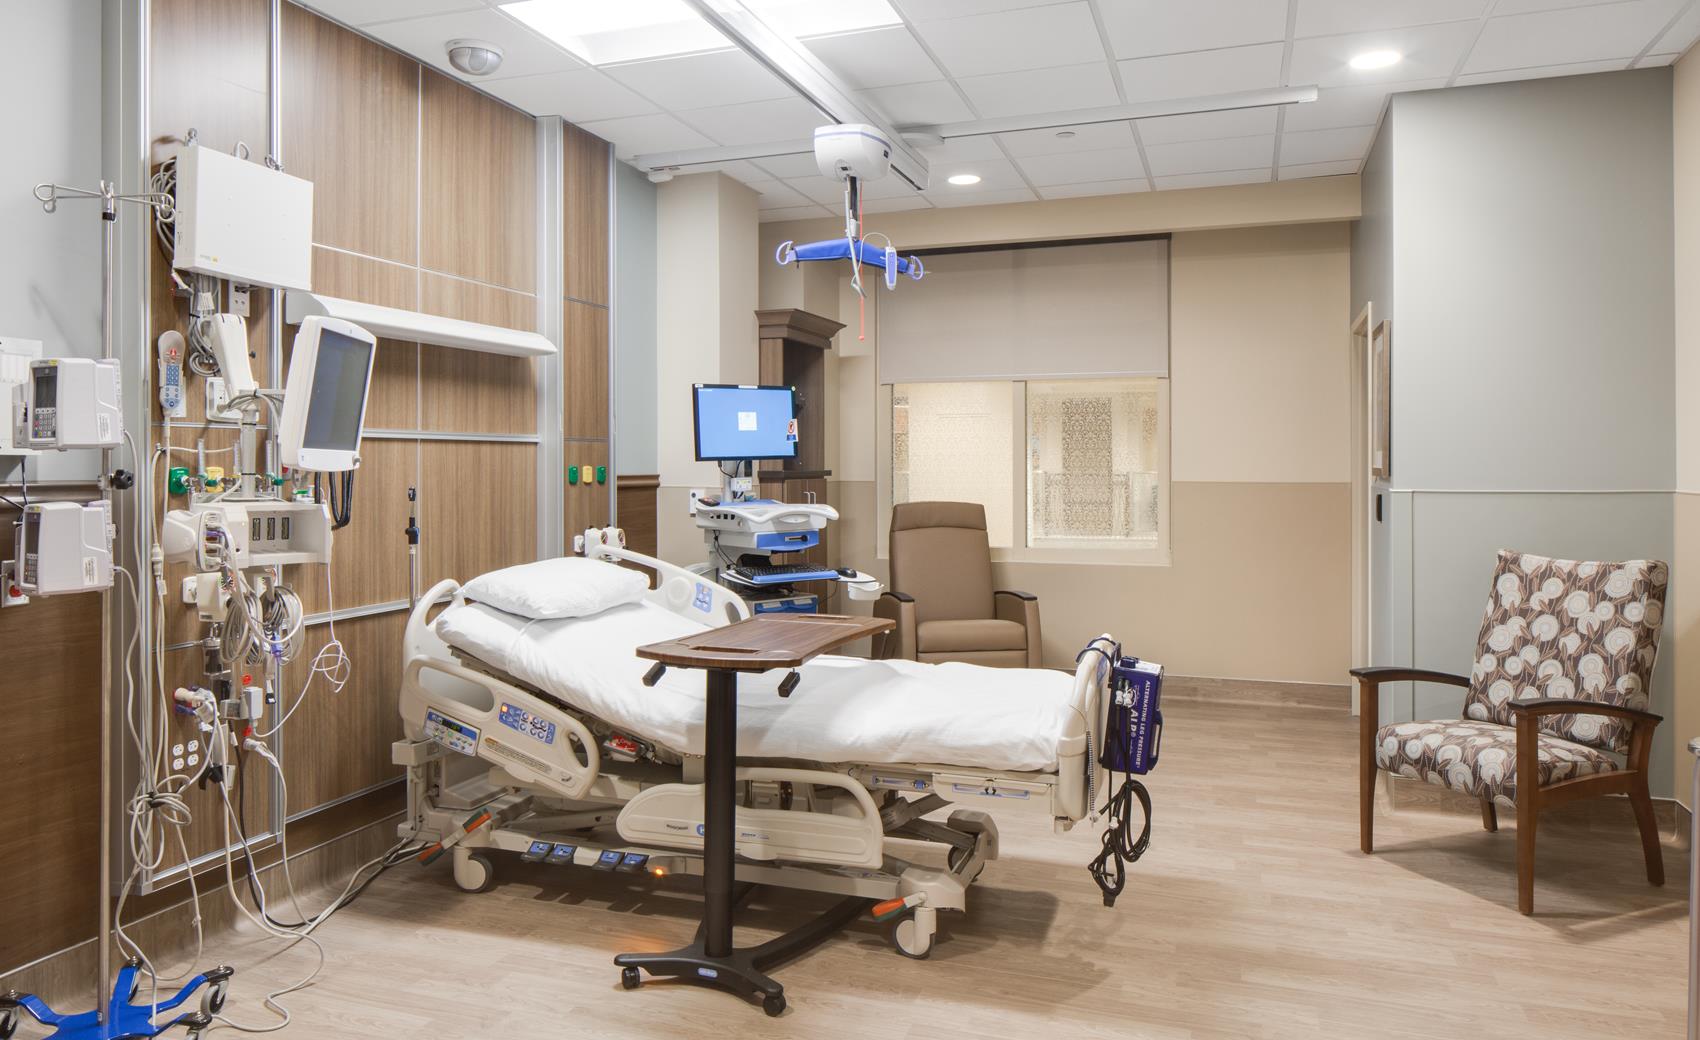 Intensive care unit room at Baptist Memorial Hospital in Oxford